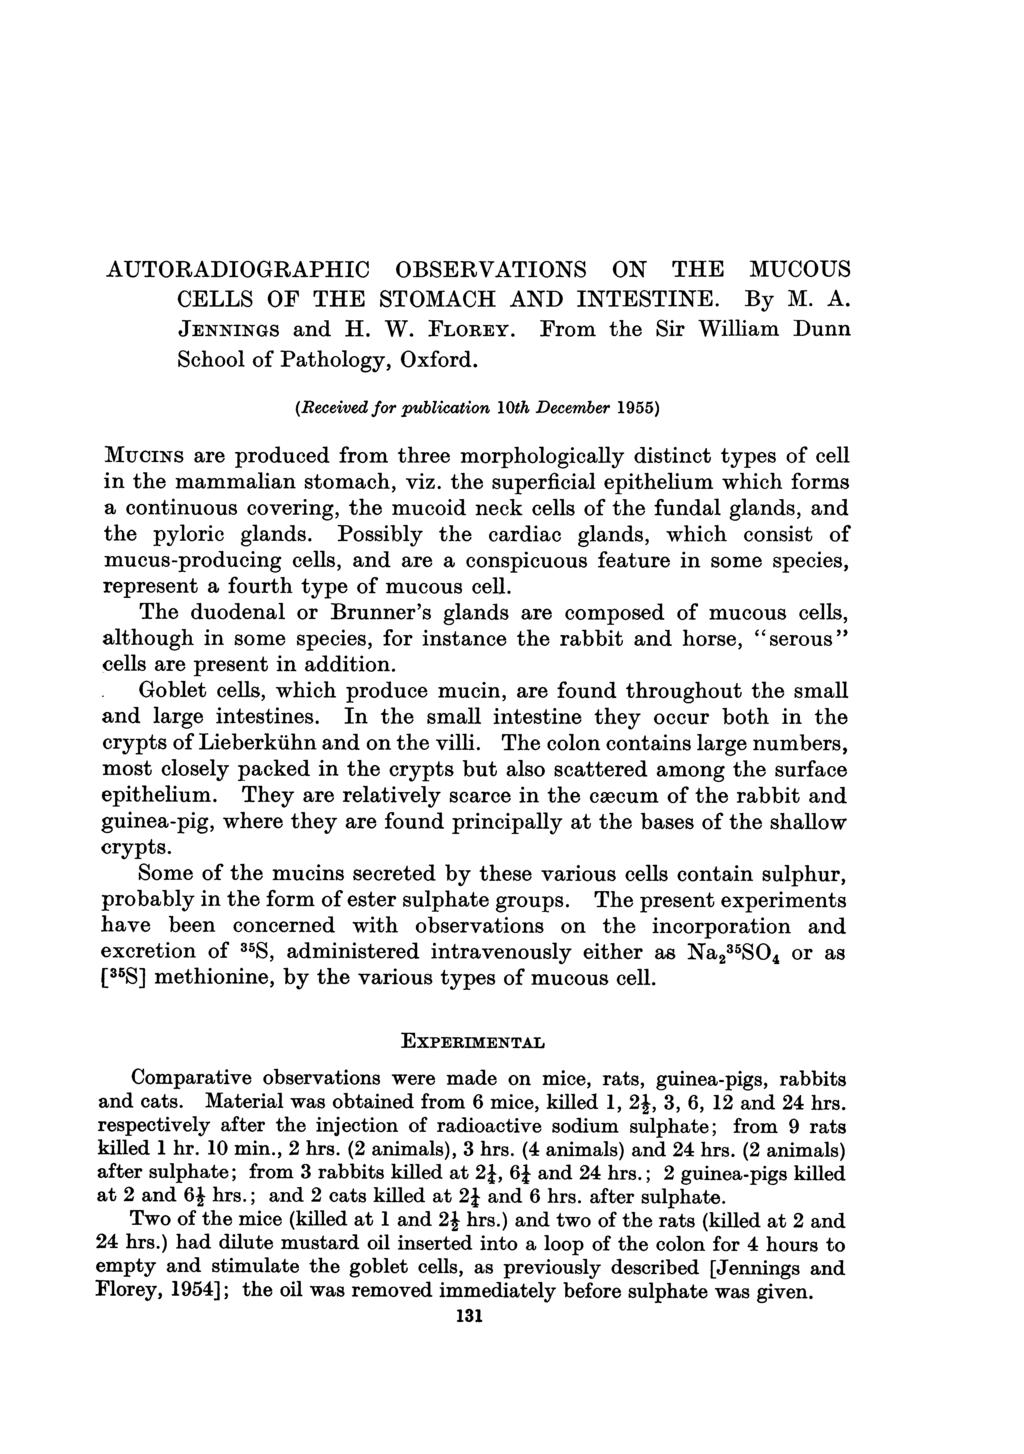 AUTORADIOGRAPHIC OBSERVATIONS ON THE MUCOUS CELLS OF THE STOMACH AND INTESTINE. By M. A. JENNINGS and H. W. FLOREY. From the Sir William Dunn School of Pathology, Oxford.